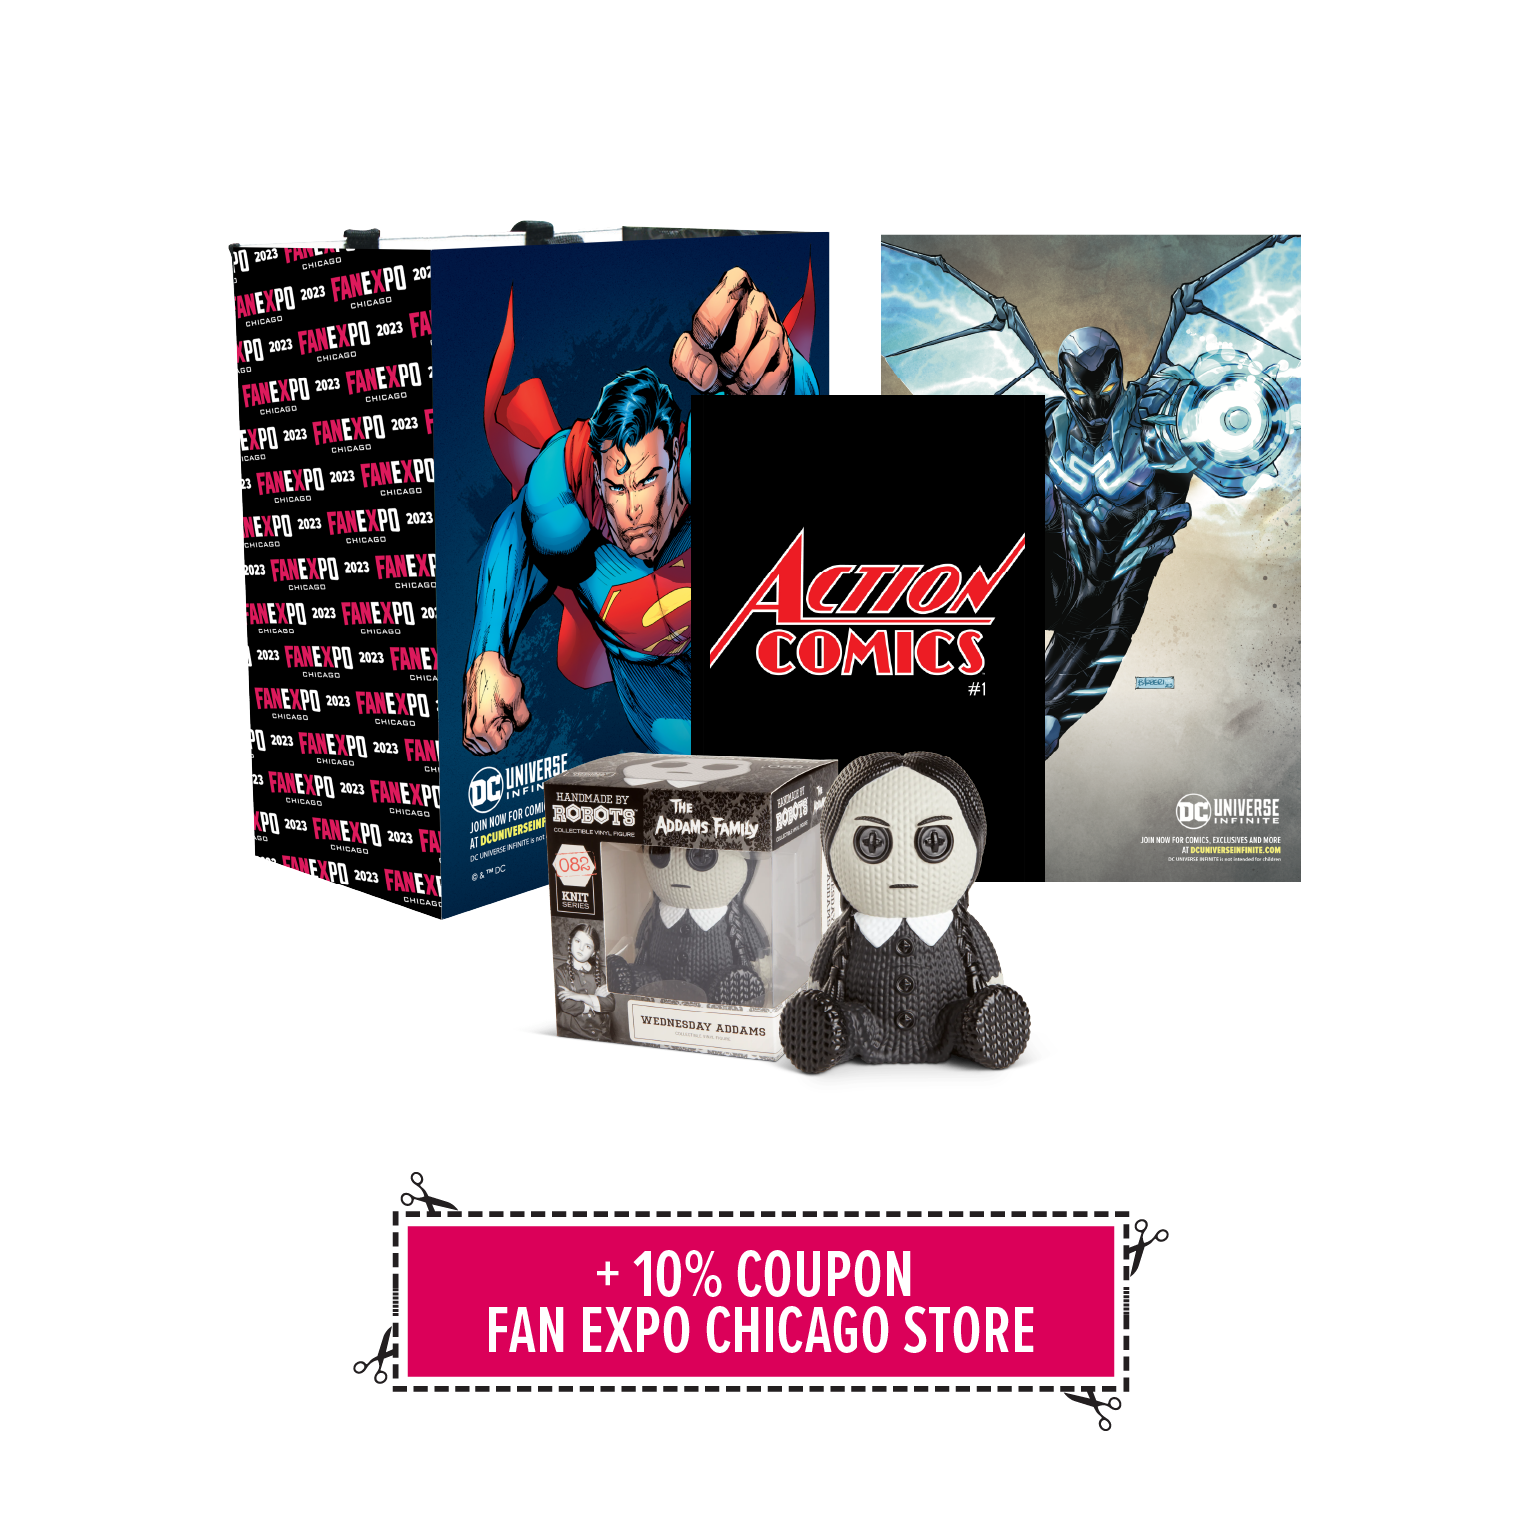 Buy Tickets FAN EXPO Chicago